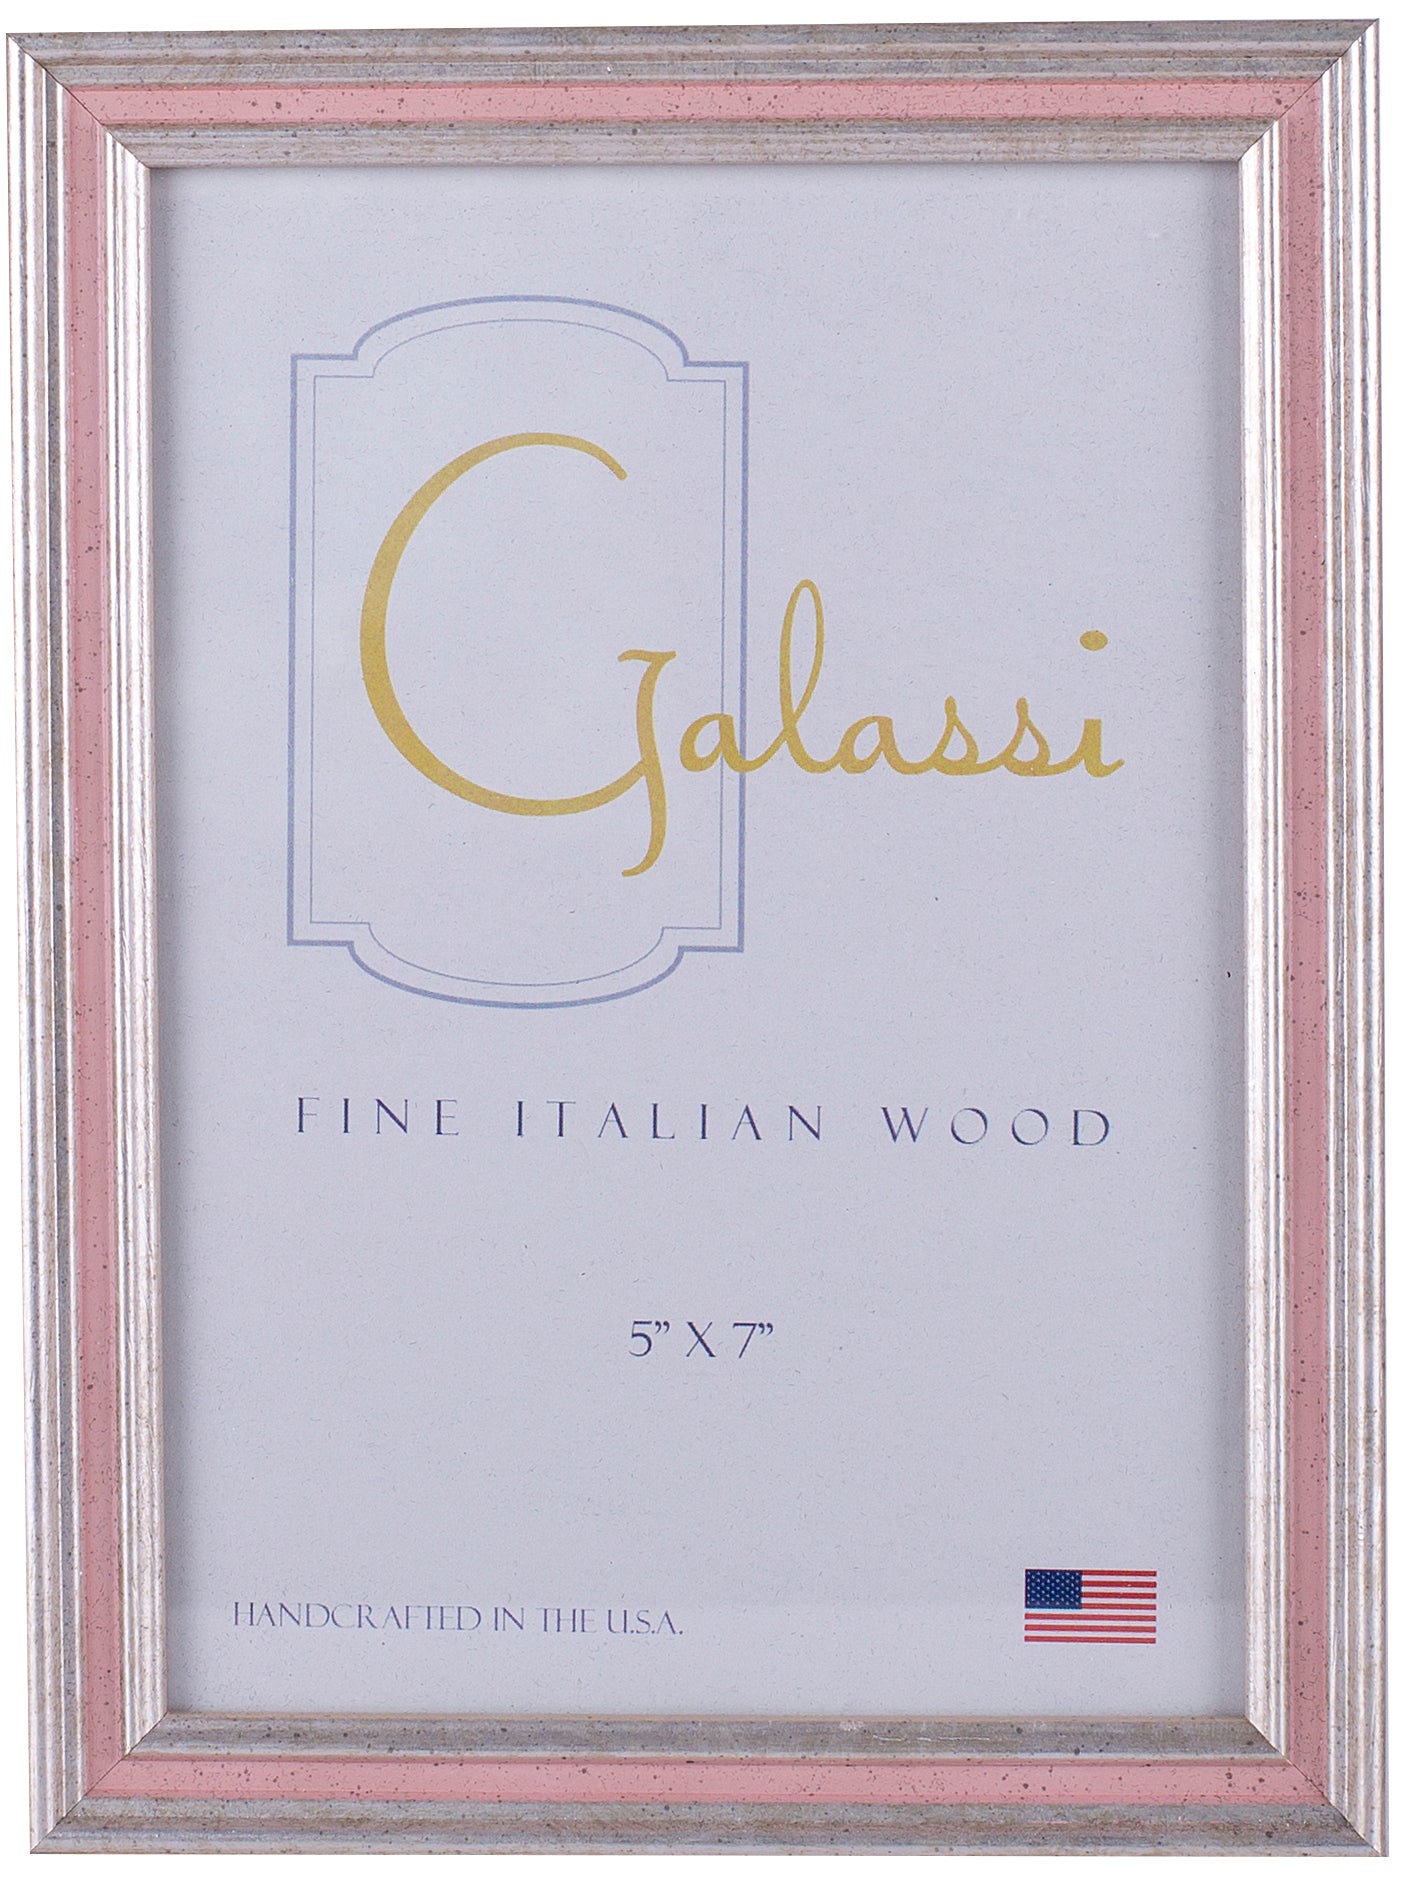 Galassi Silver and Pink Channel Wood Frame